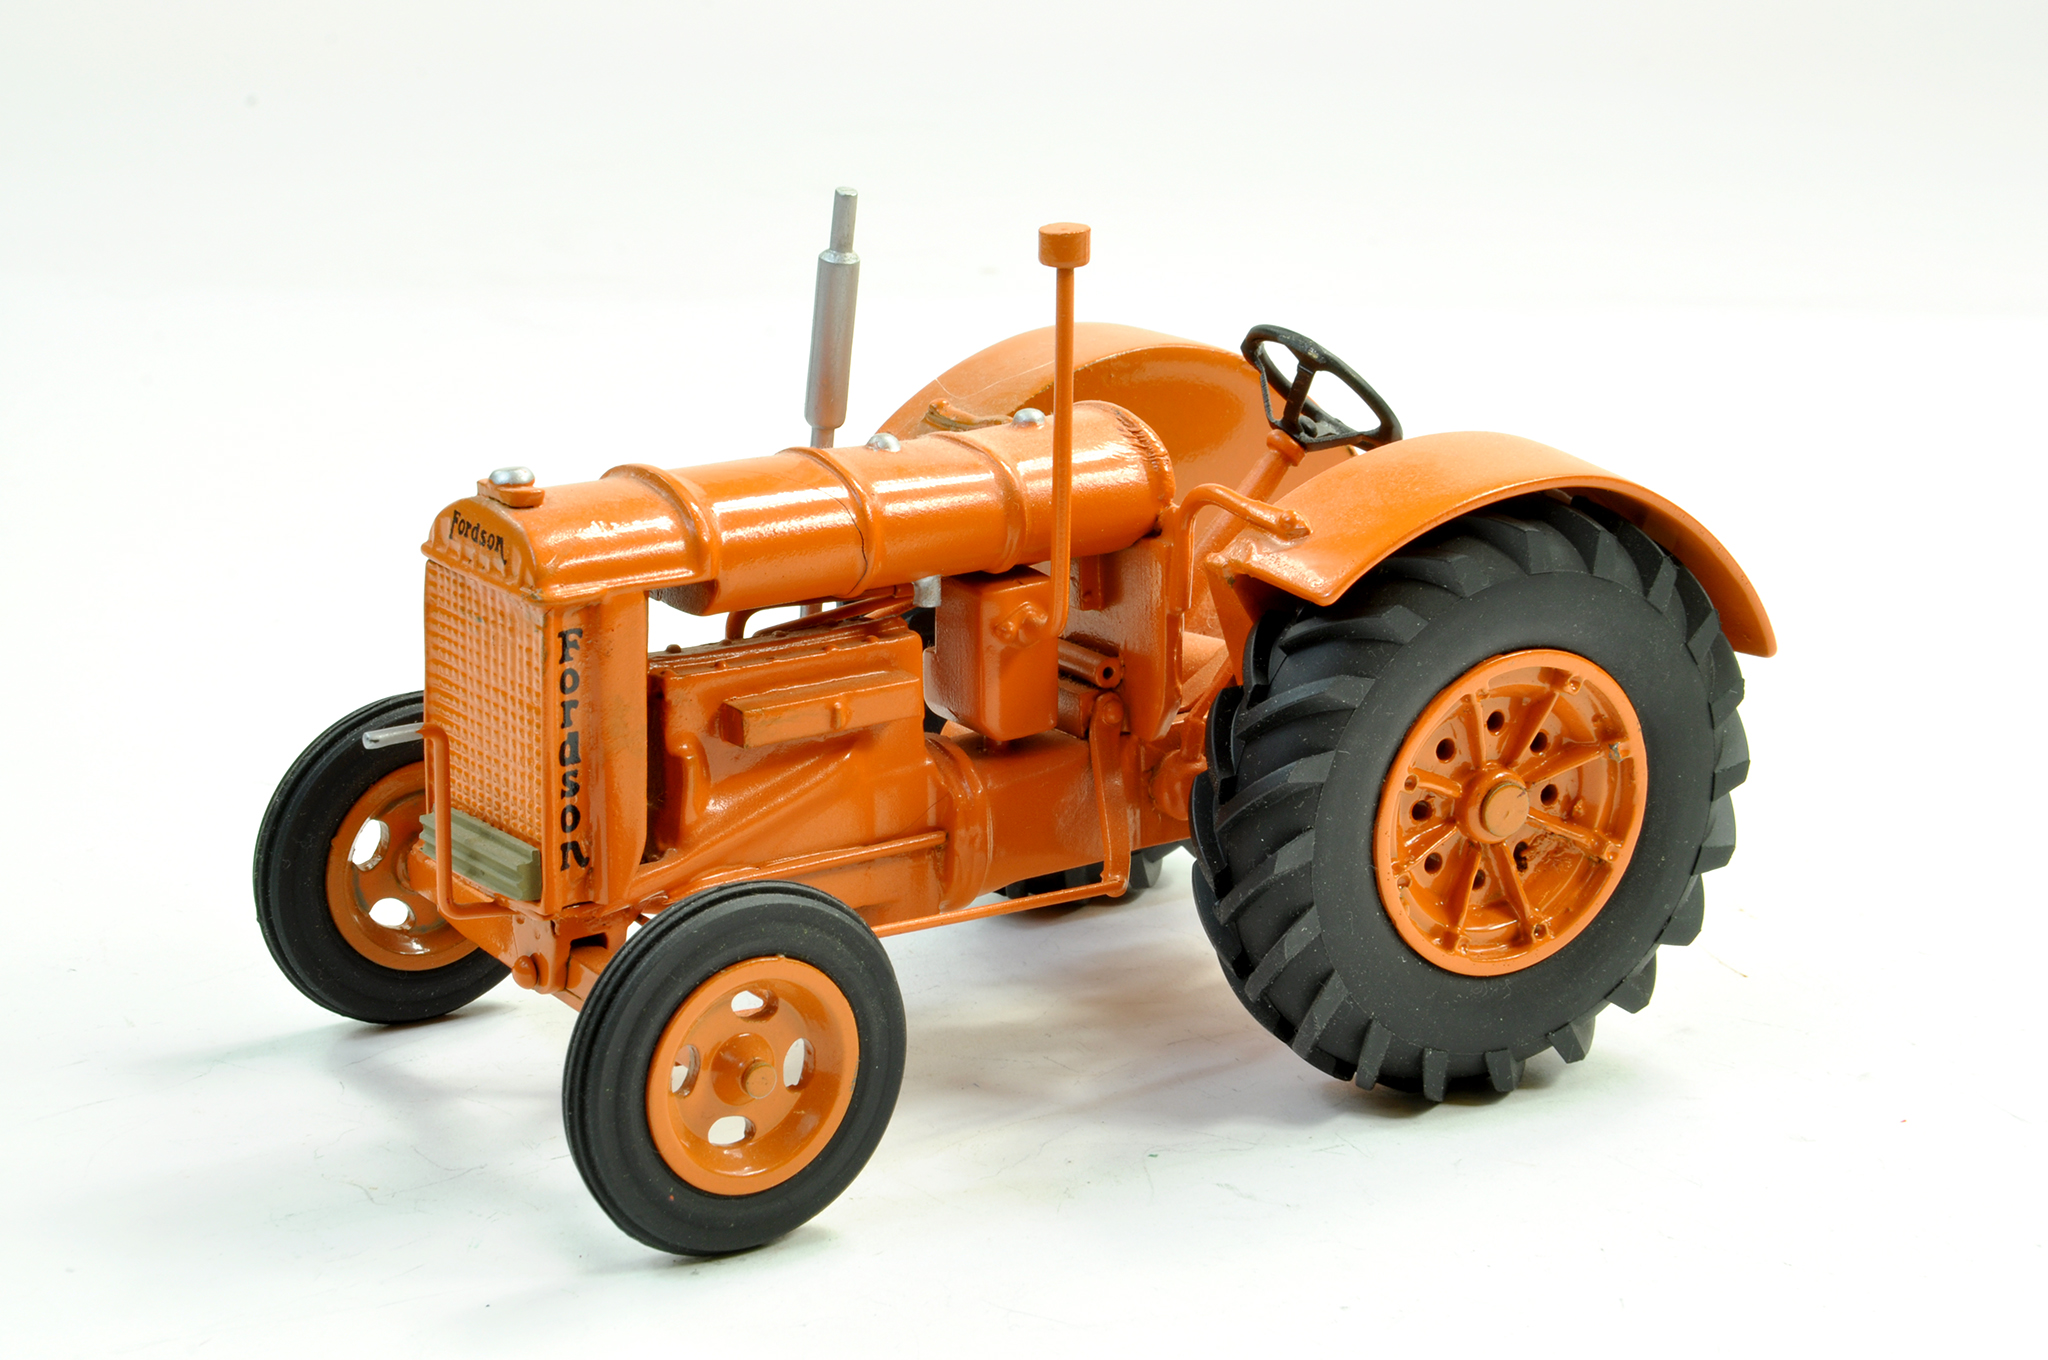 Malc's Models Original 1/16 Hand Built Model of a Fordson Standard Tractor with Rubber Tyres in